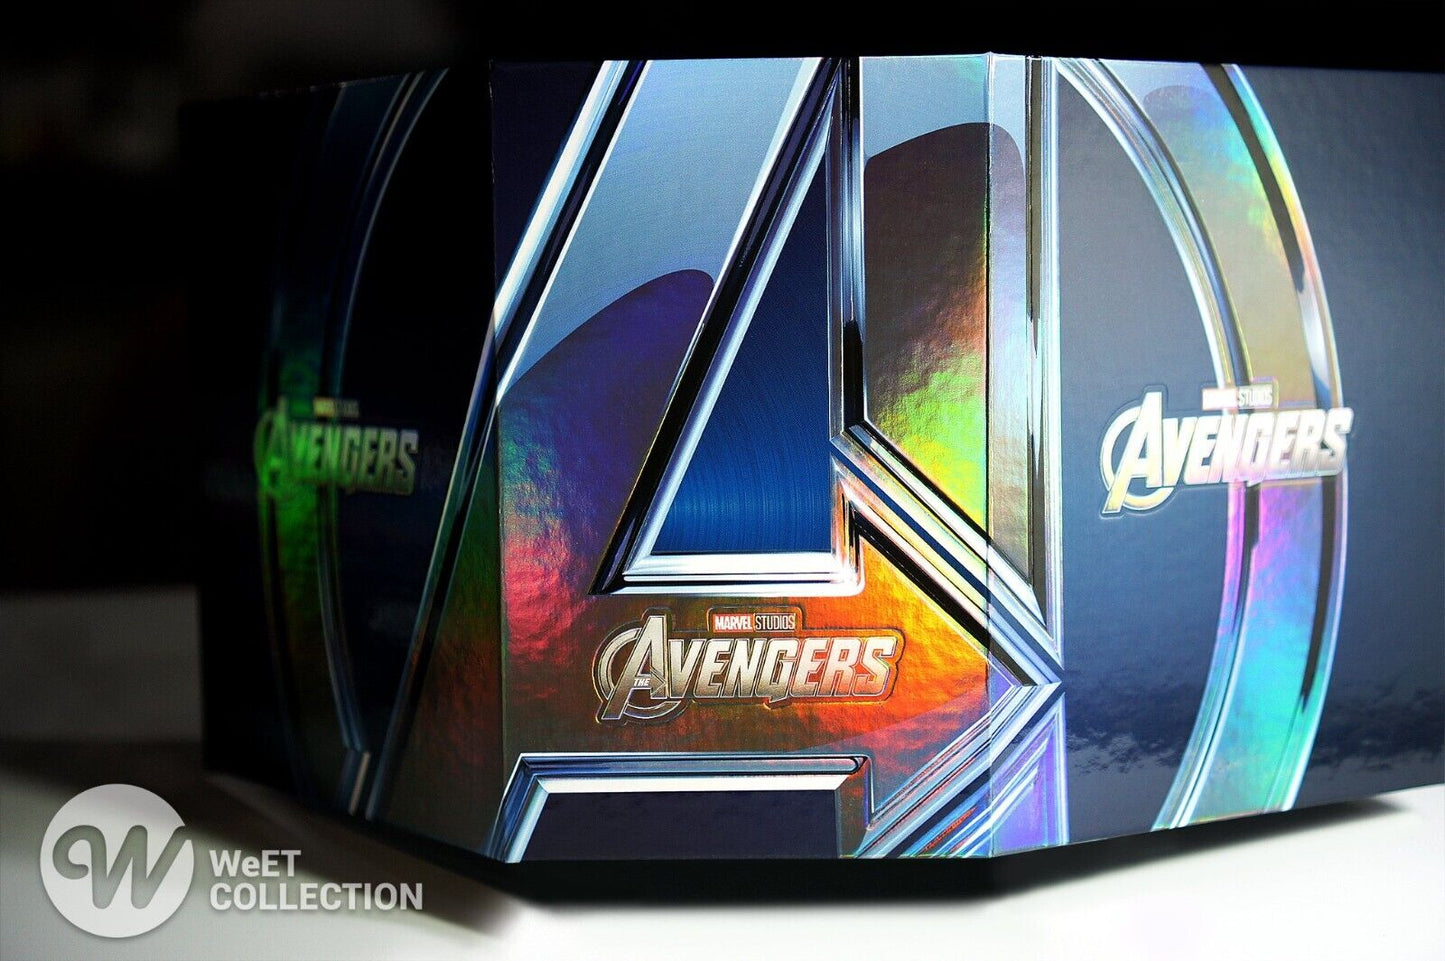 Avengers 4K+2D+3D Blu-ray SteelBook WeET Collection Exclusive #14 Box Set